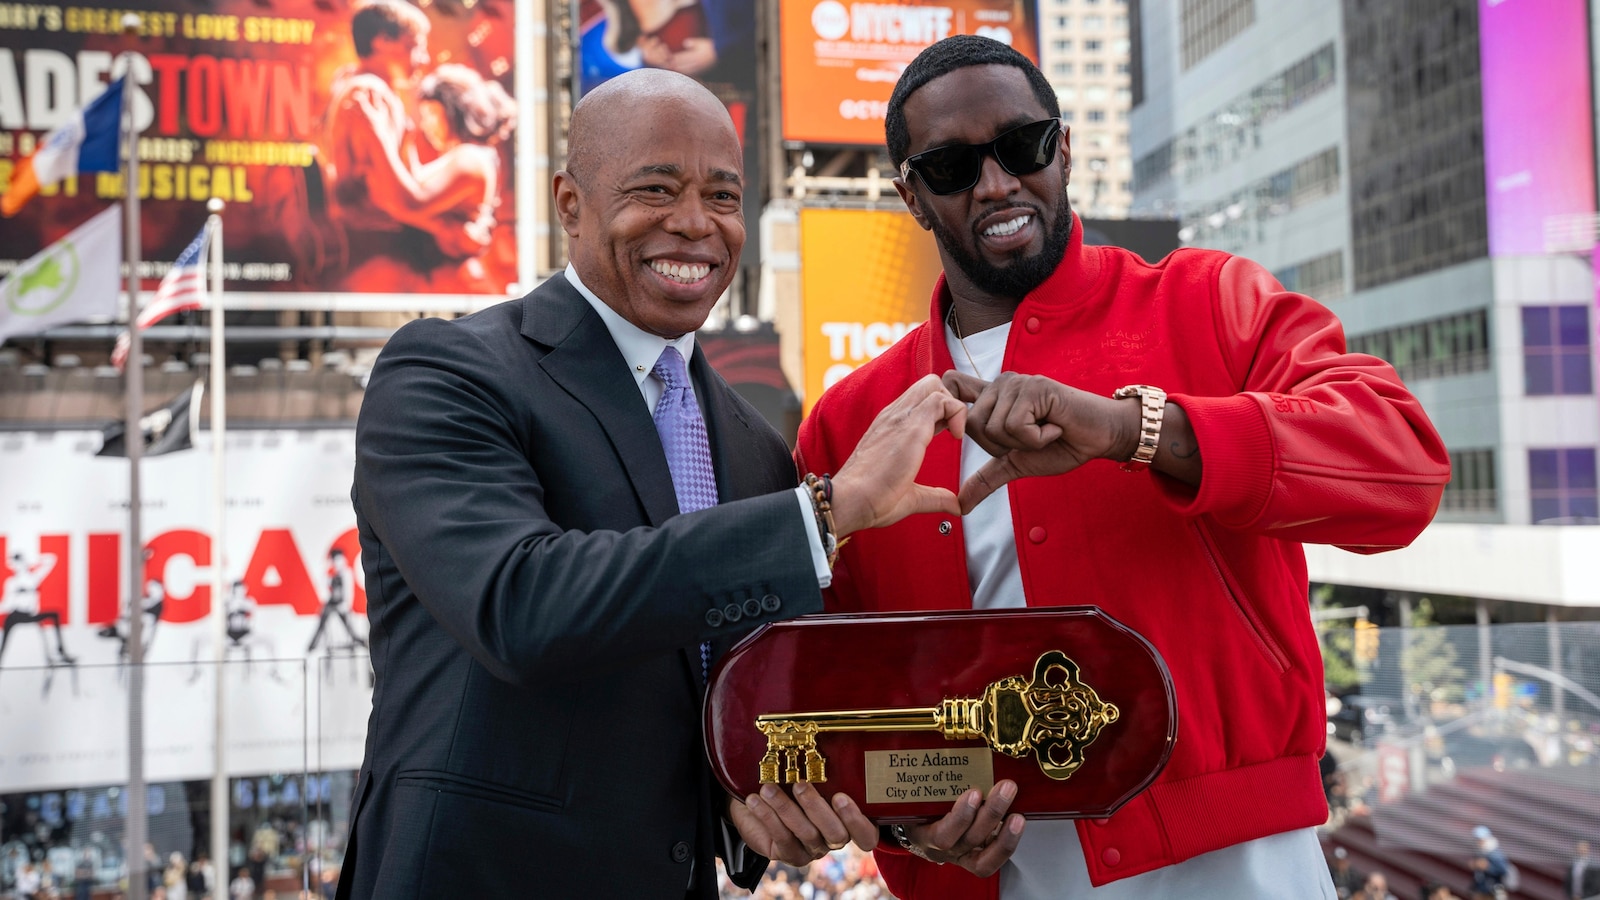 Sean 'Diddy' Combs Returns Key to New York City Following Controversial Video Involving Singer Cassie